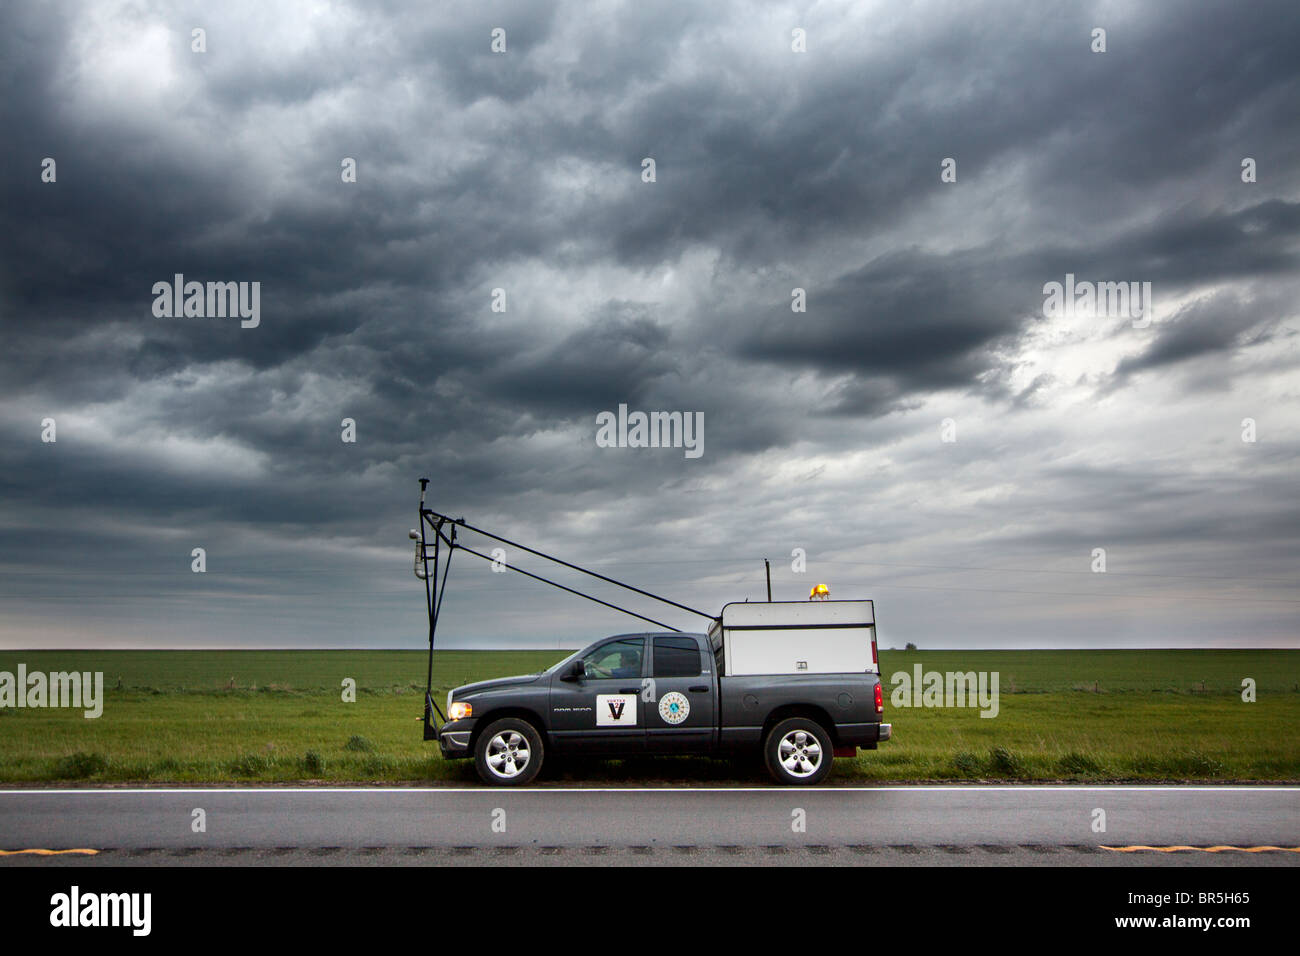 Storm chasers inside a truck participate in Project Vortex 2 Stock Photo